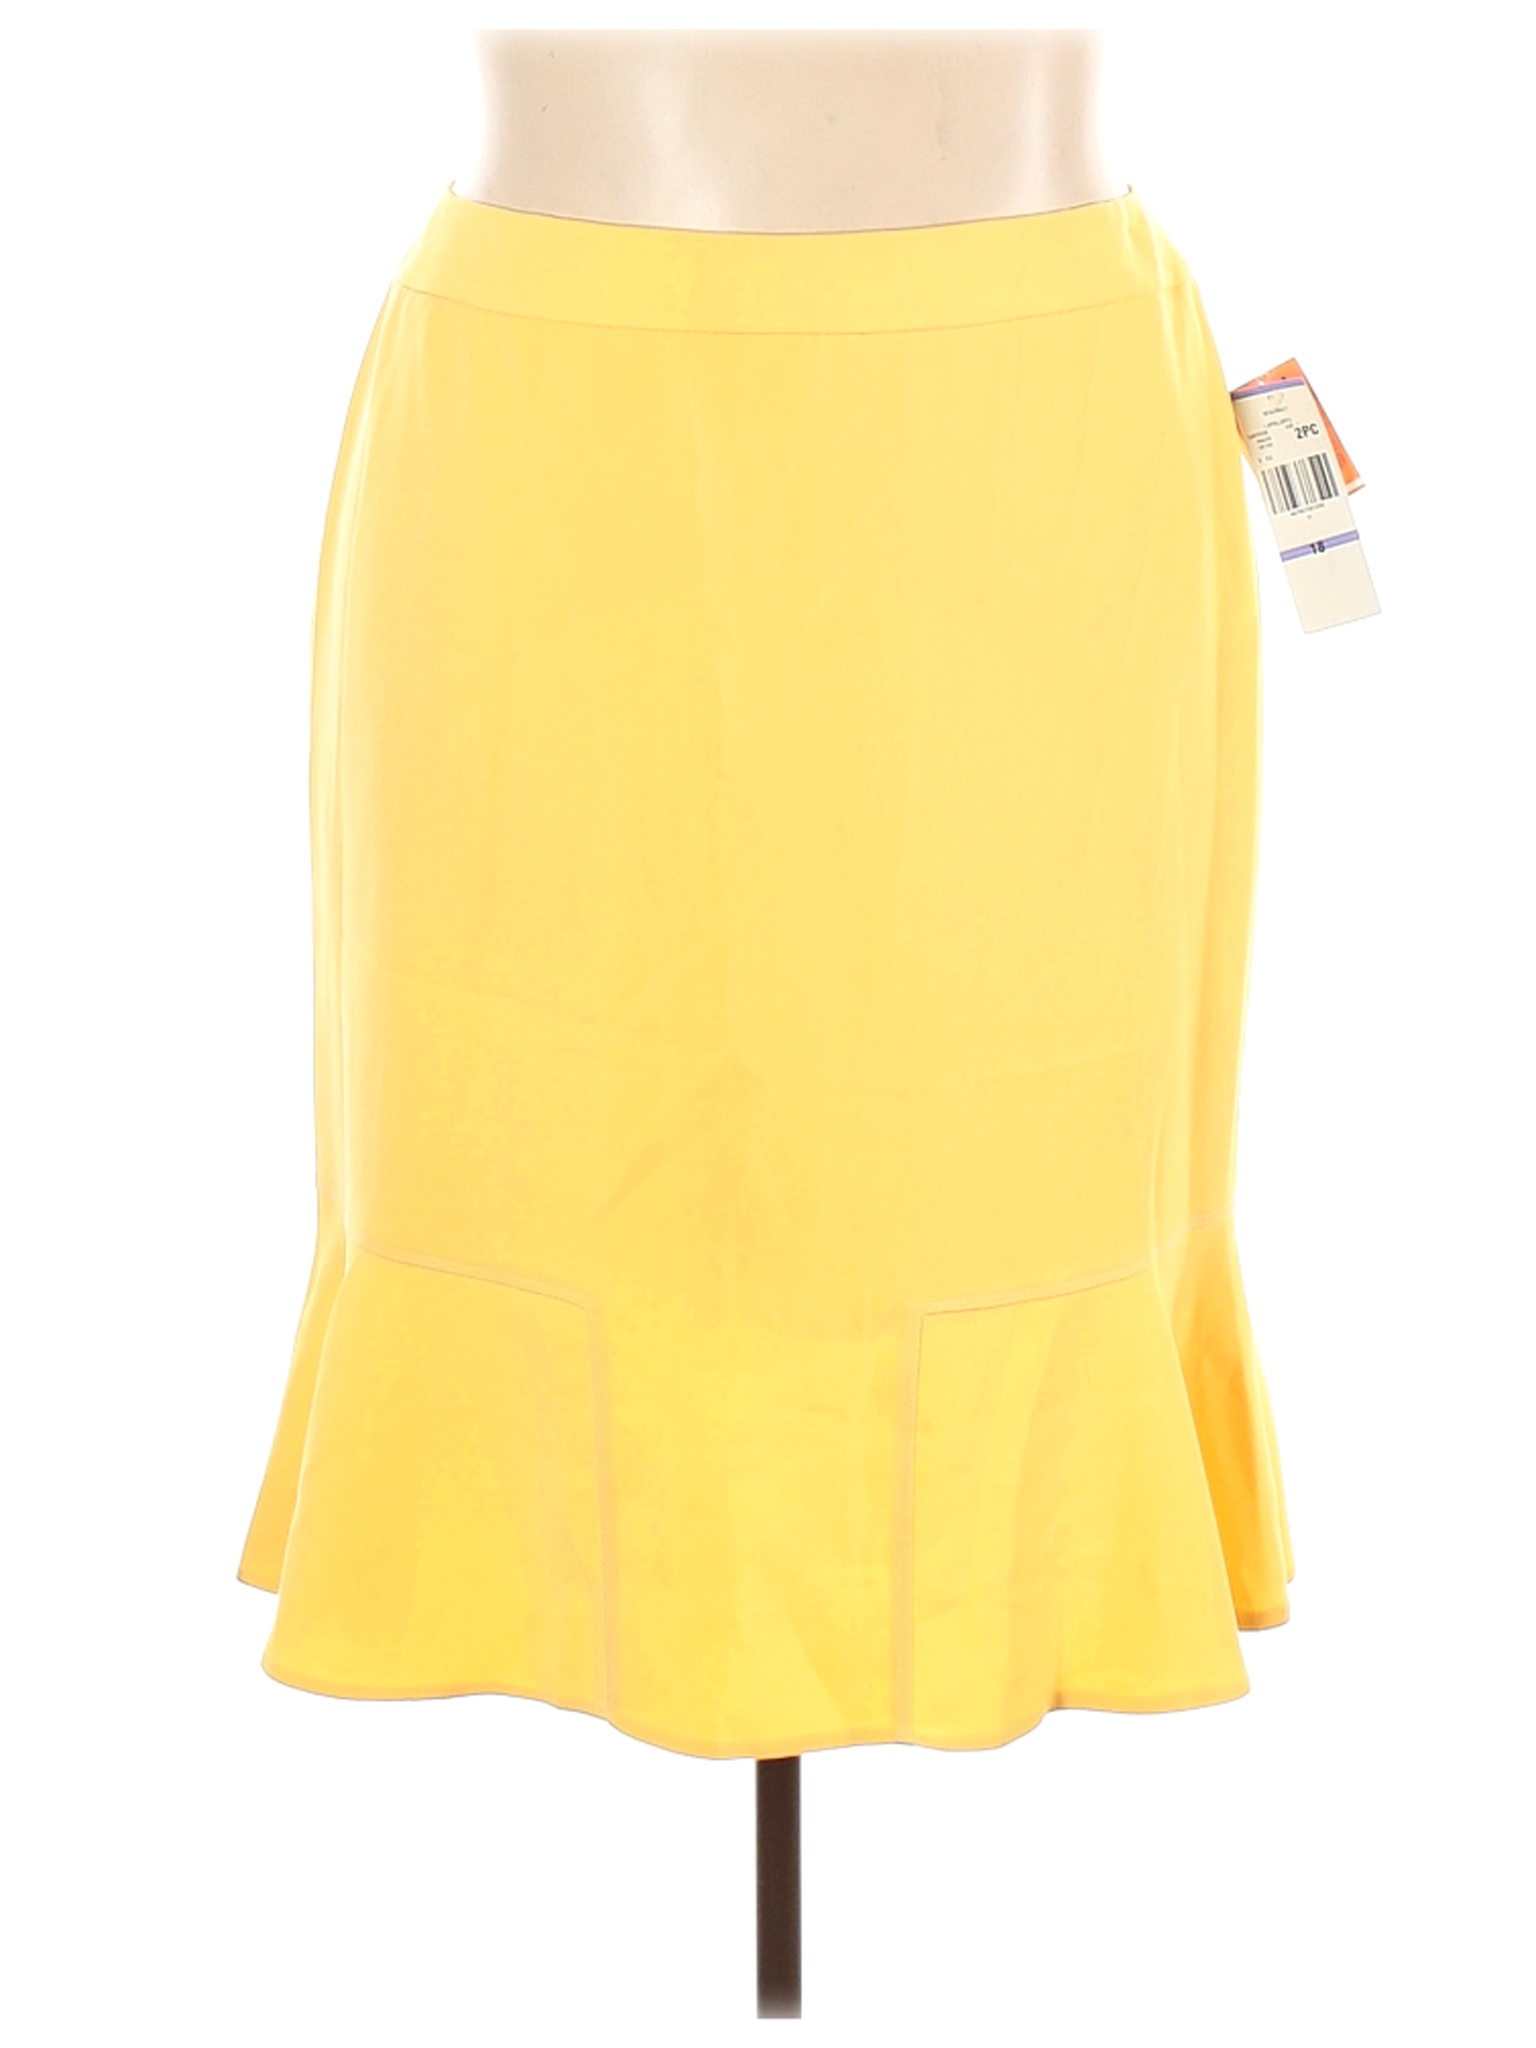 NWT Collections for Le Suit Women Yellow Casual Skirt 18 Plus | eBay